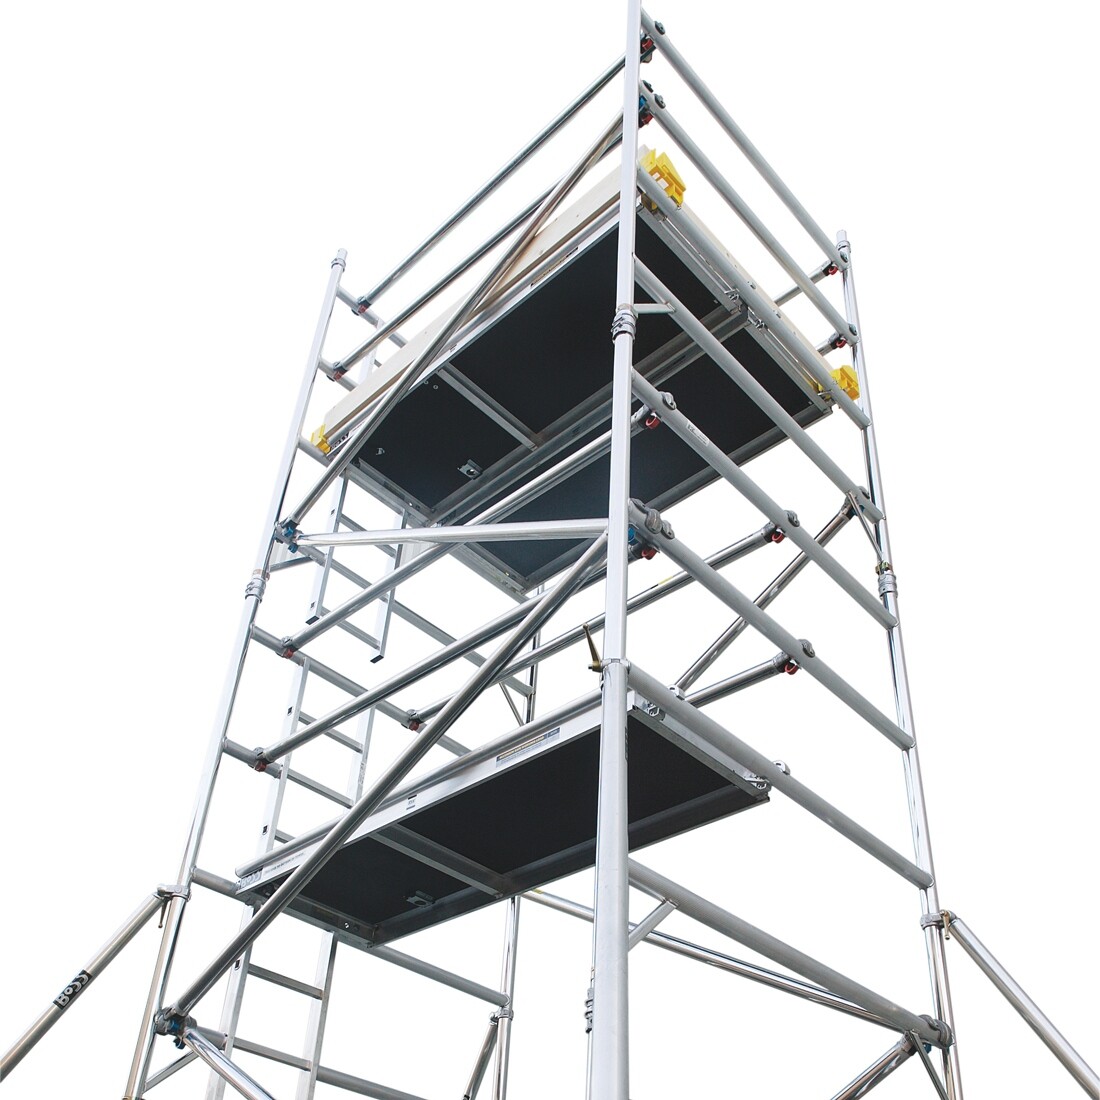 Aluminium Mobile Access Tower - 0.8m Wide x 1.8m or 2.4m Long